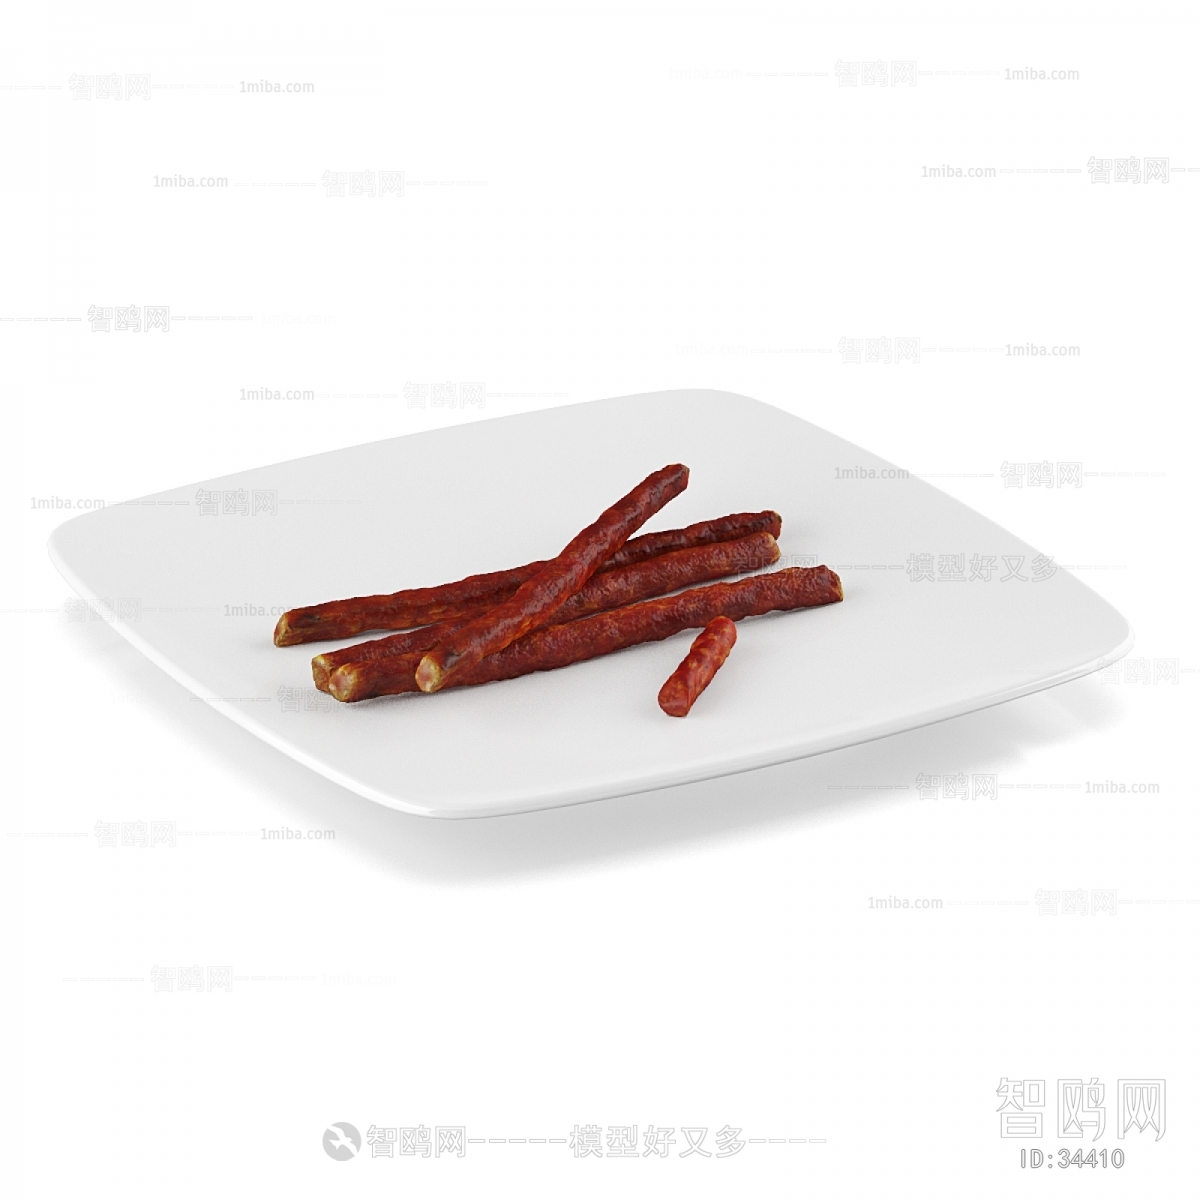 Modern Meat Product